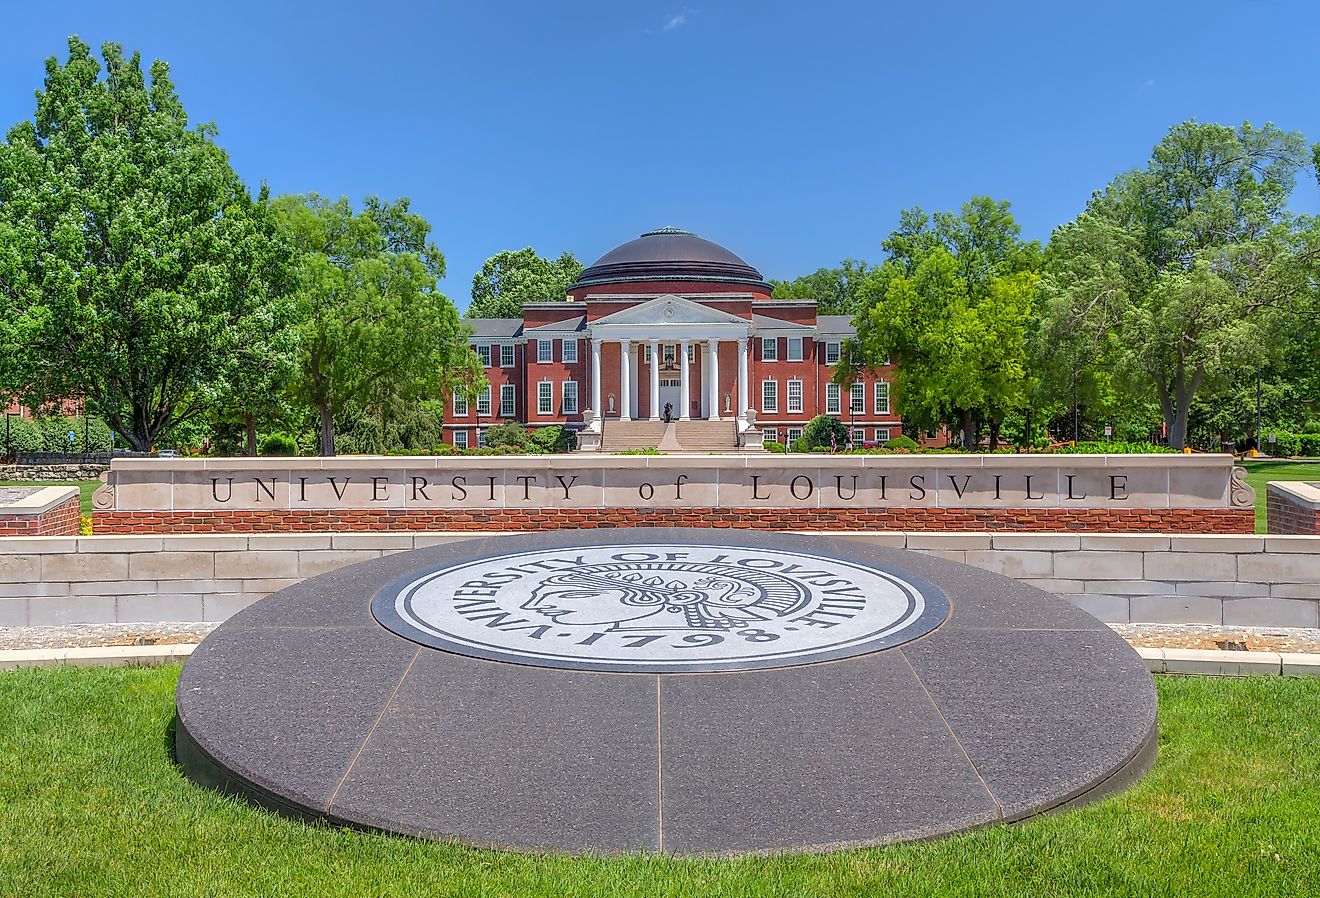 University of Louisville Entrance and logo with campus building. Image credit wolterke via AdobeStock.